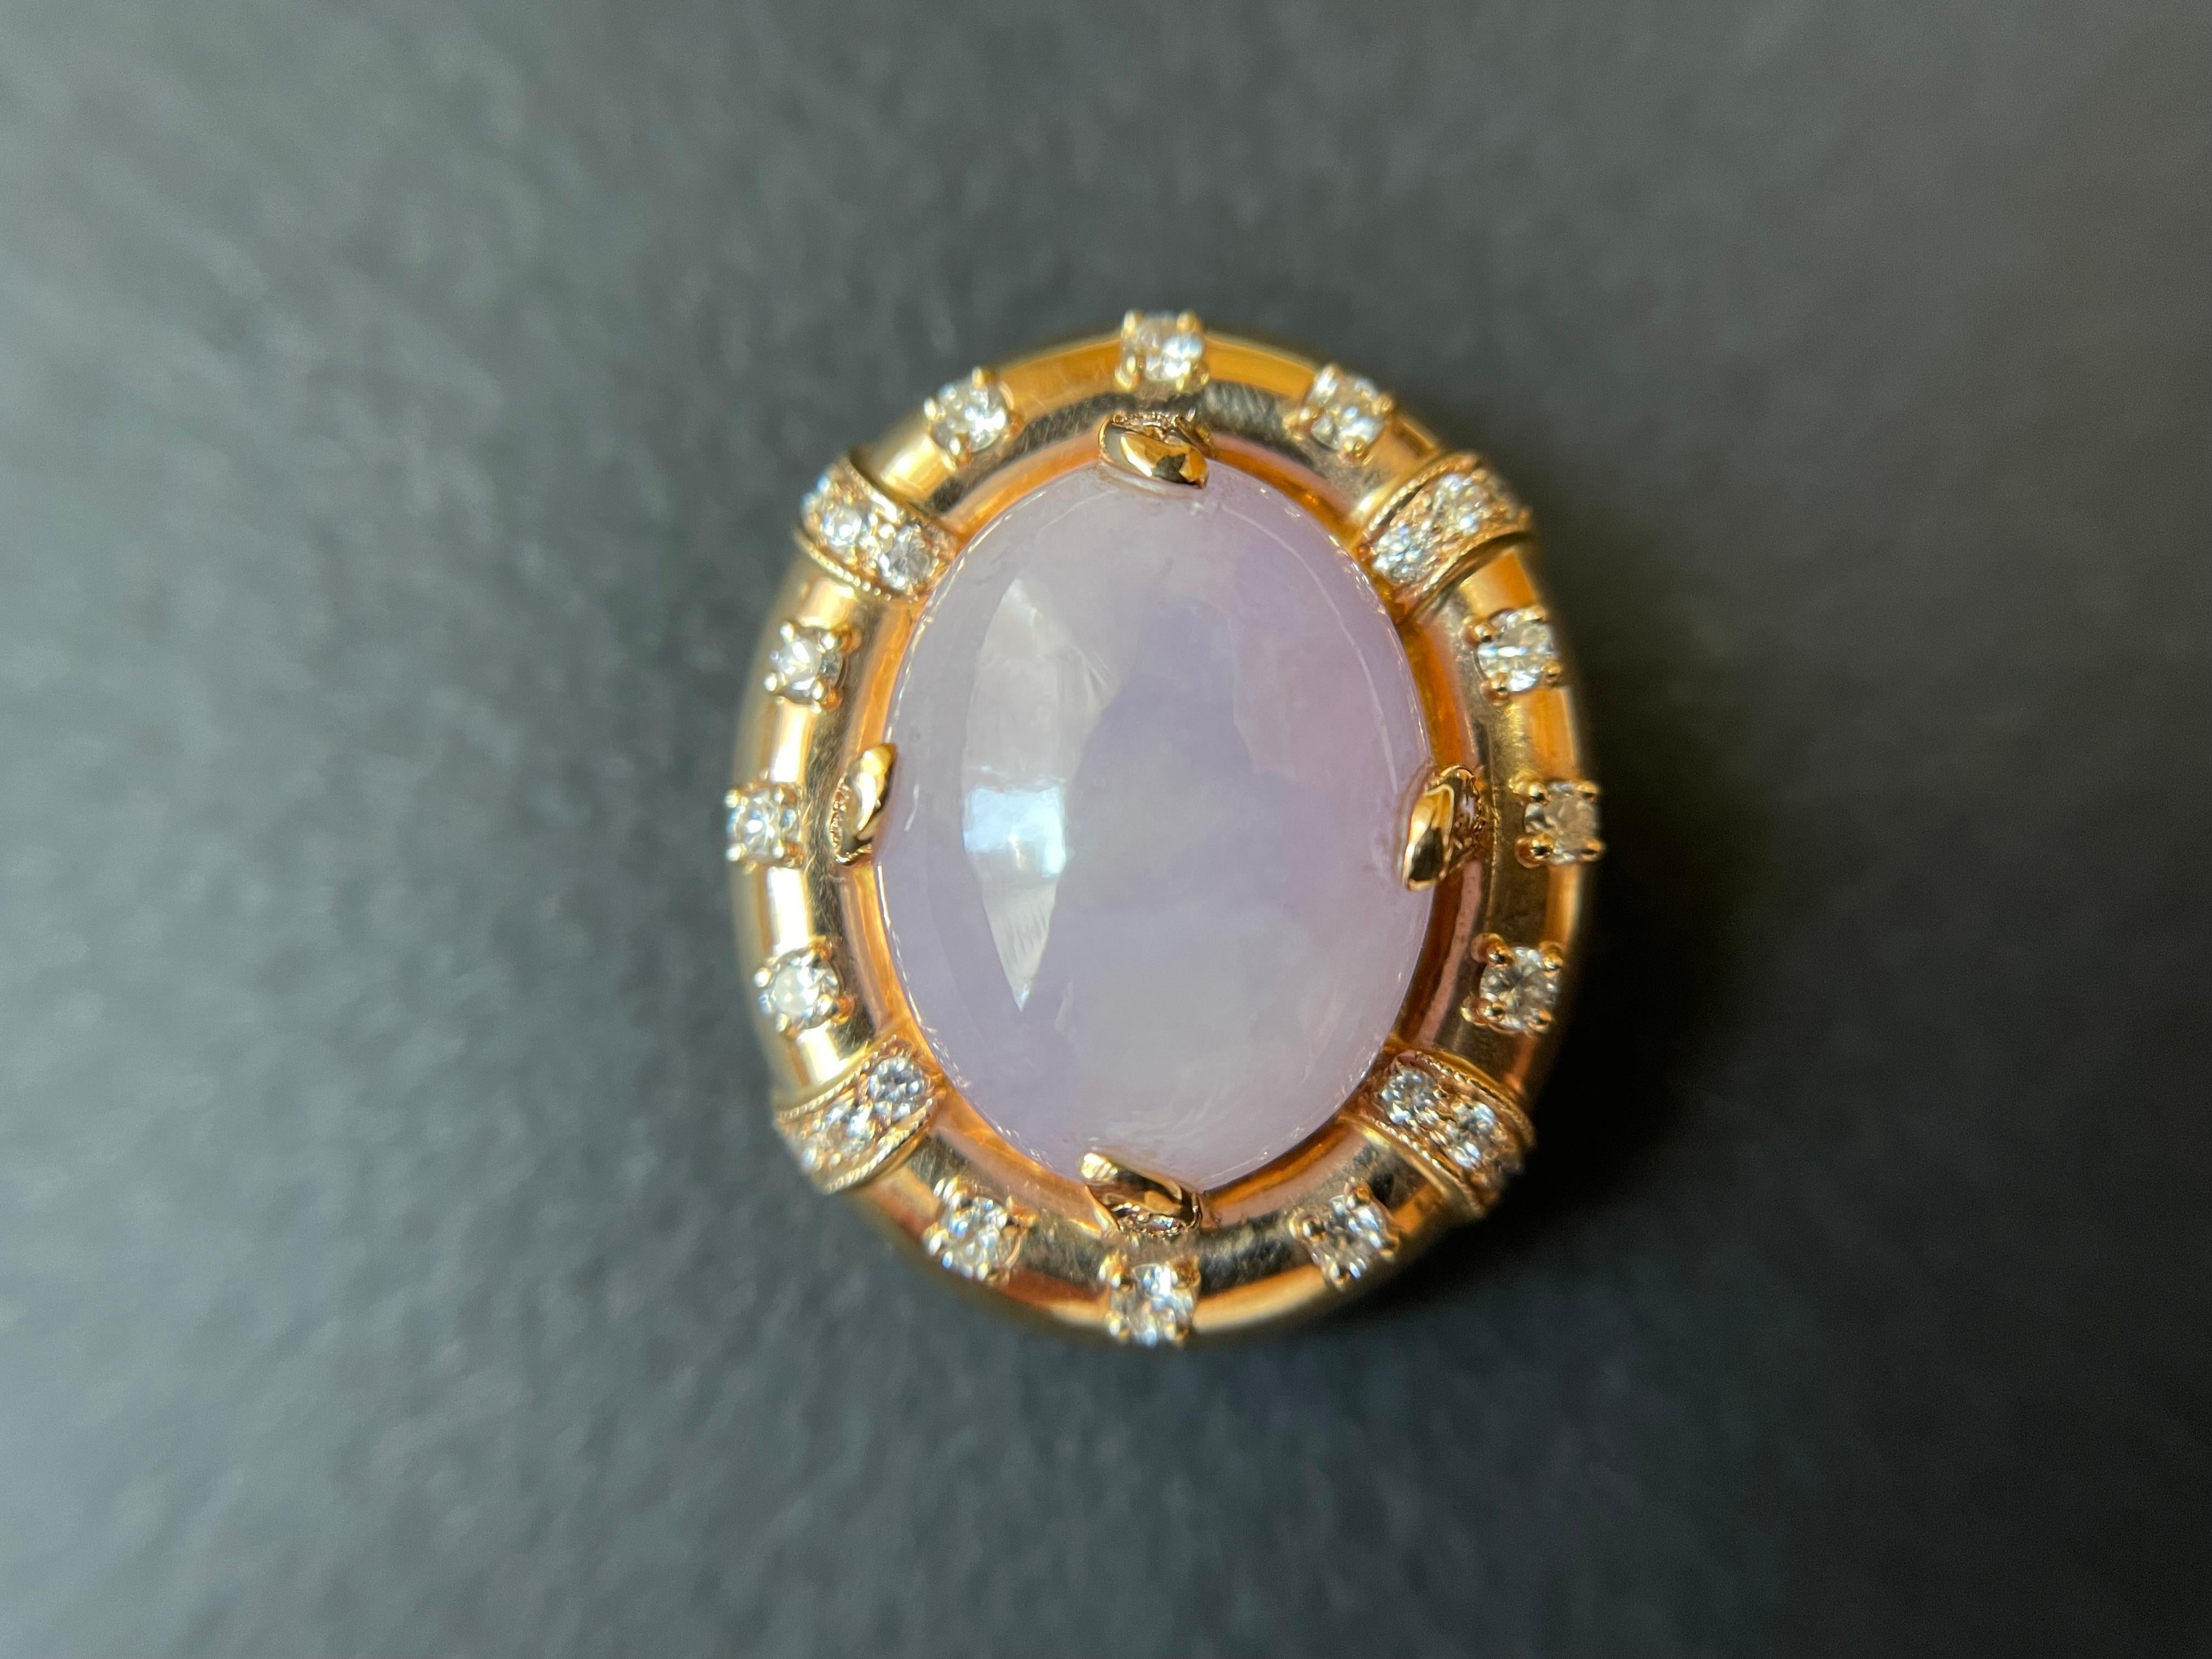 Introducing the Lavender Jadeite Cabochon Pendant - a true masterpiece of nature! Crafted from one-of-a-kind Type A Jadeite sourced from Myanmar, each pendant is a unique work of art, framed with sumptuous 18K solid gold and adorned with sparkling